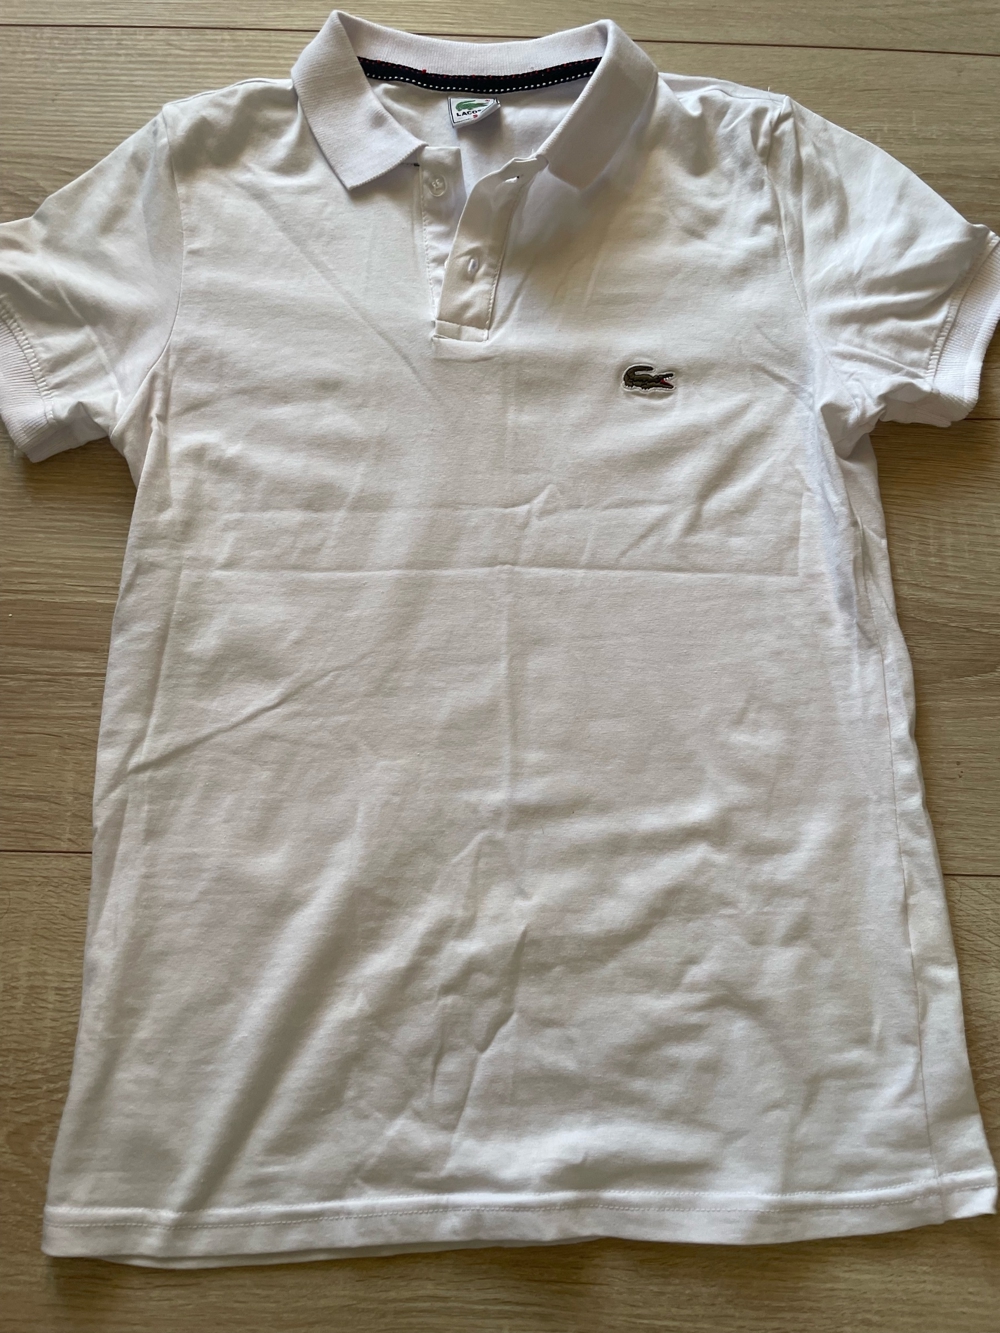 Poloshirt Lacoste in S (slim fit)